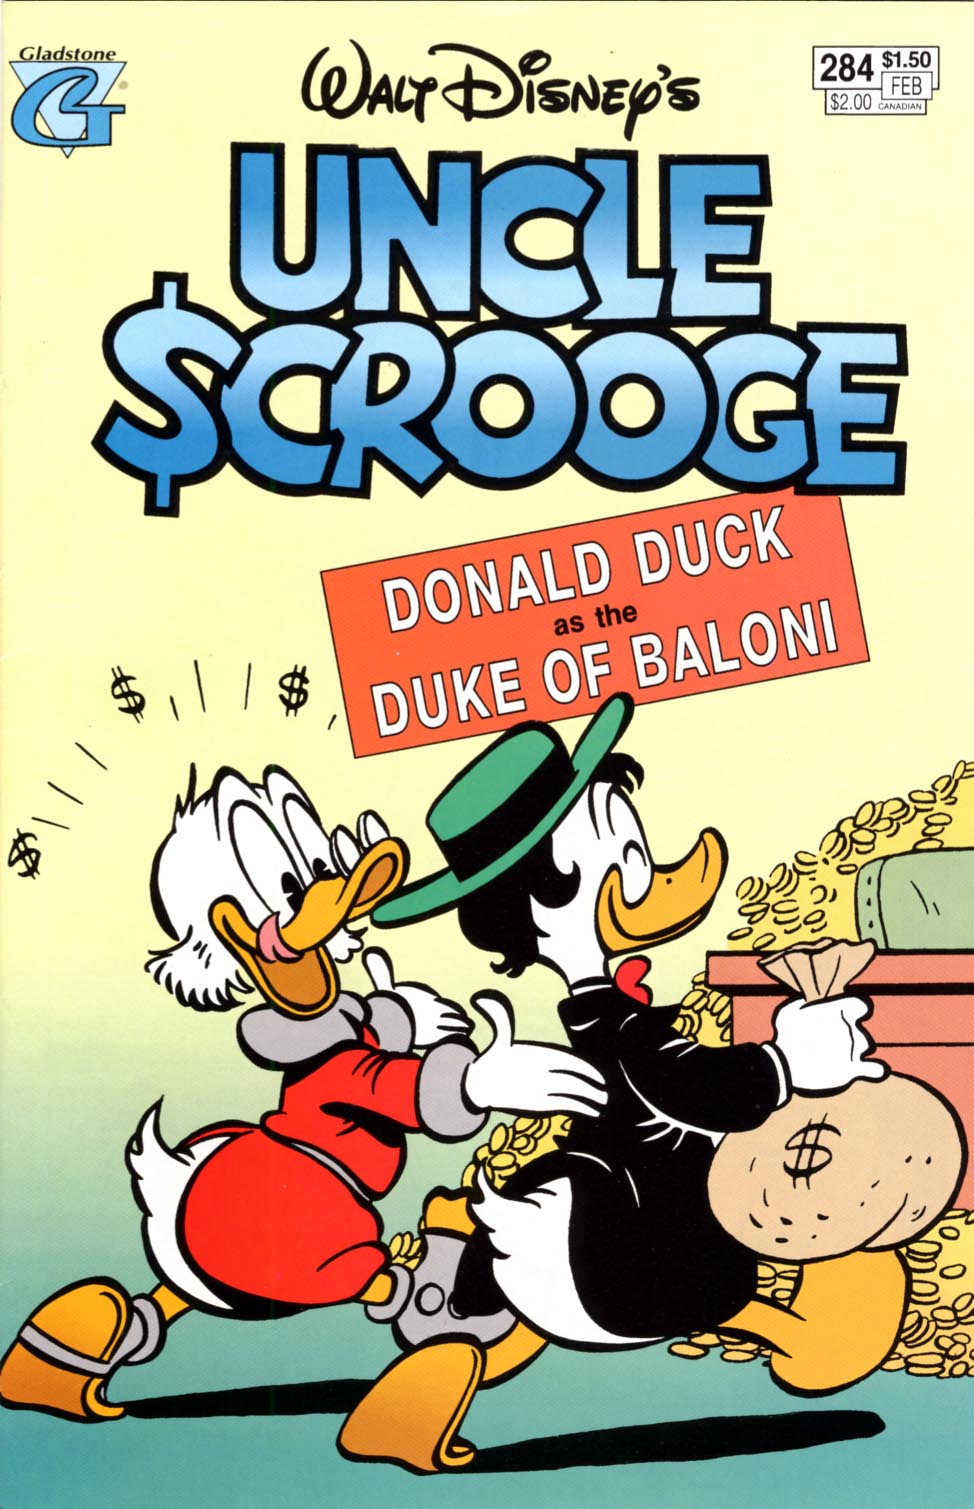 Read online Uncle Scrooge (1953) comic -  Issue #284 - 1